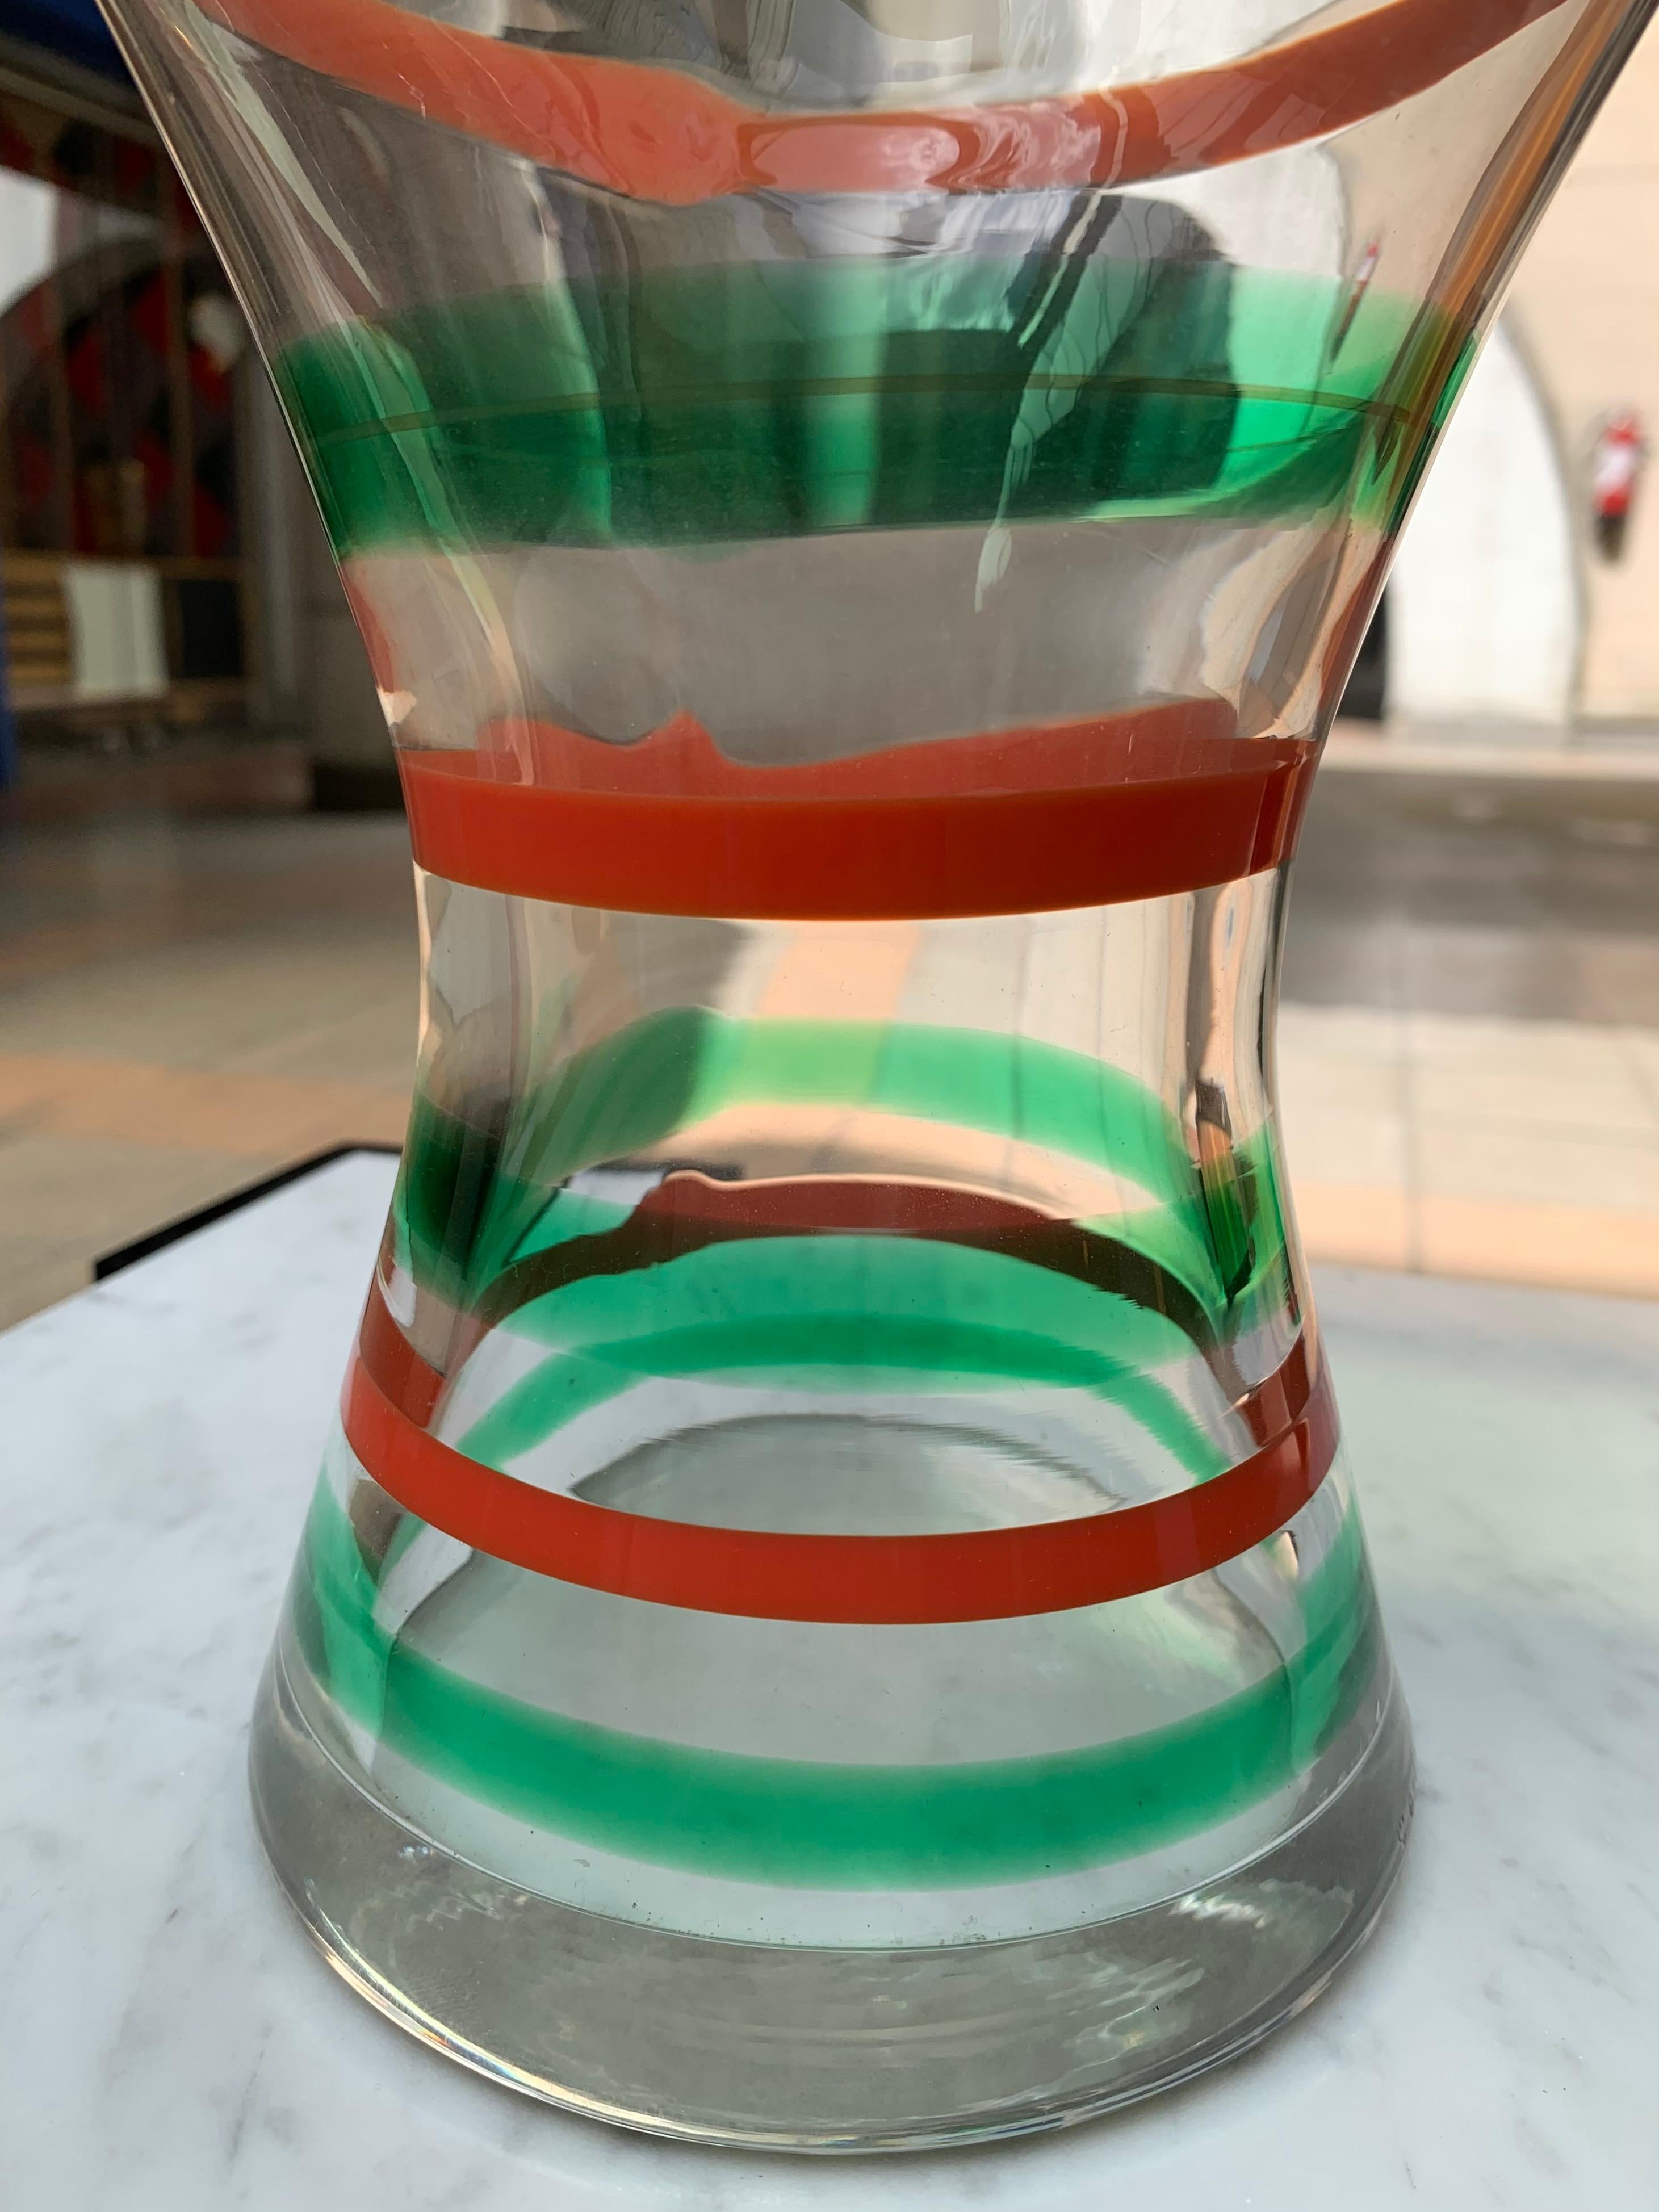 Carlo Moretti vase in Murano glass

Circa : 1980
Dimensions : H 33 x D 16
Signed on the foot of the vase 

750€.